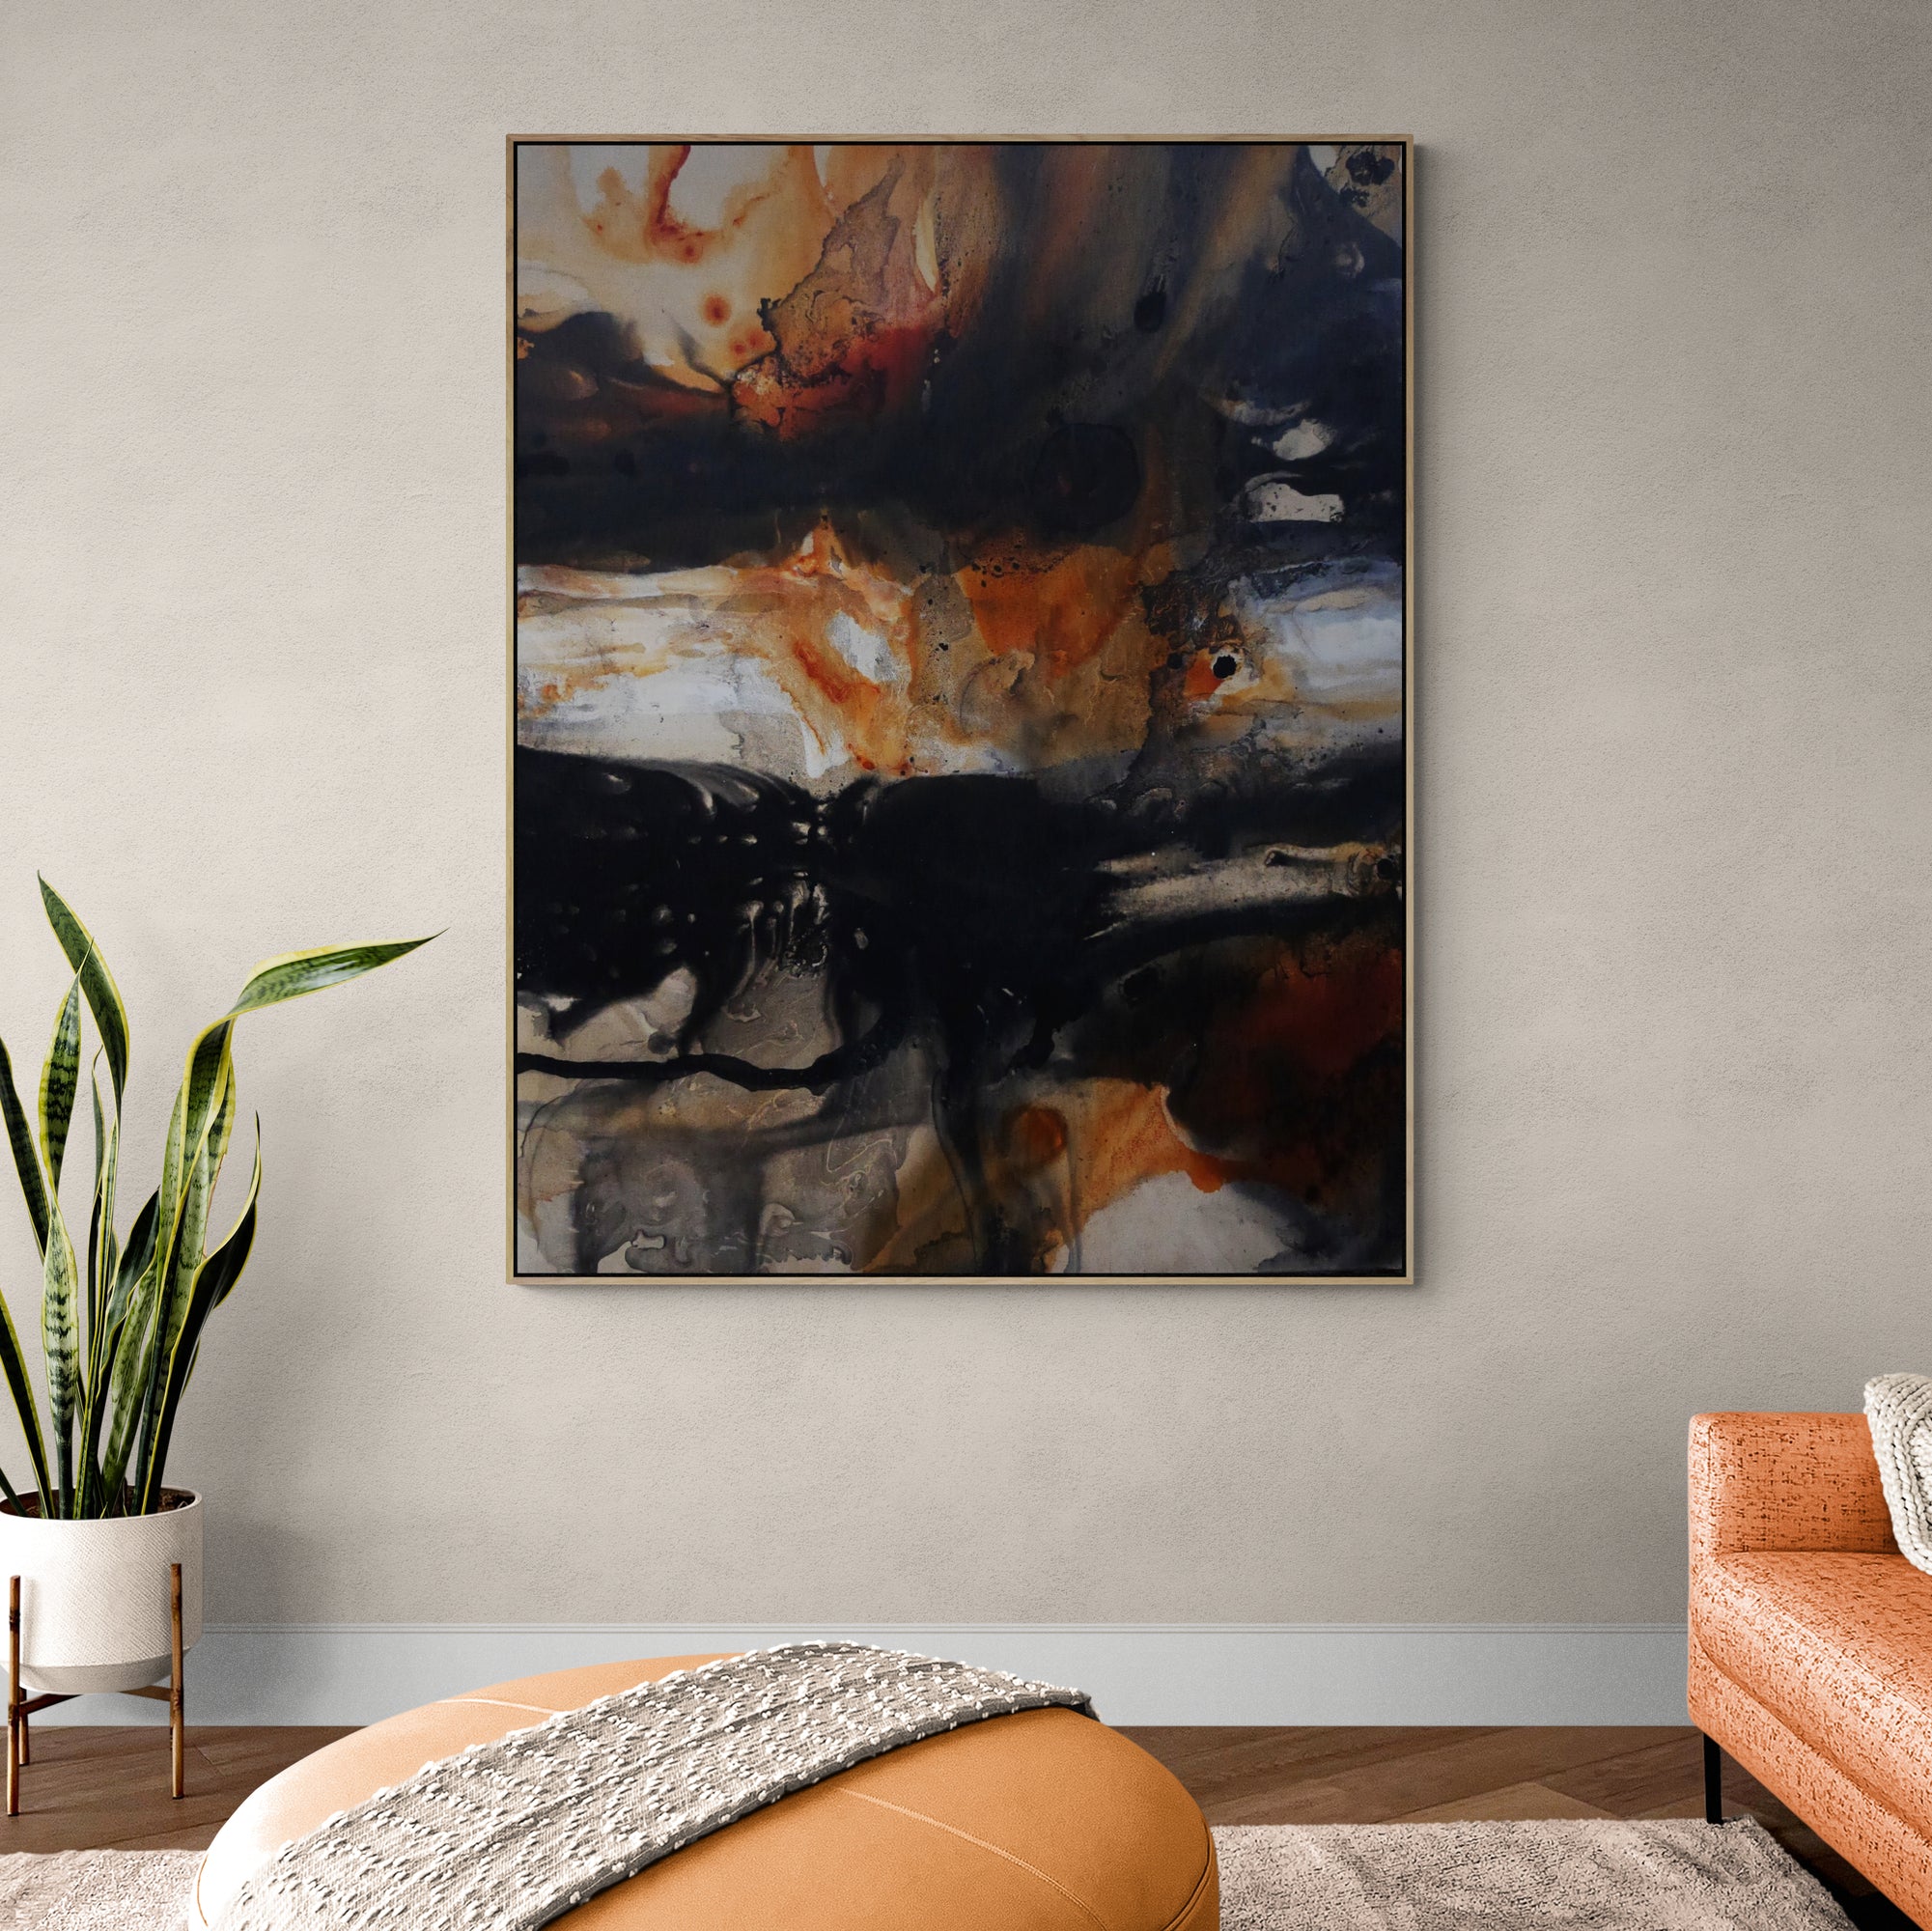 Refined 944 120cm x 150cm Rust Black White Cream and Grey textured Abstract Painting